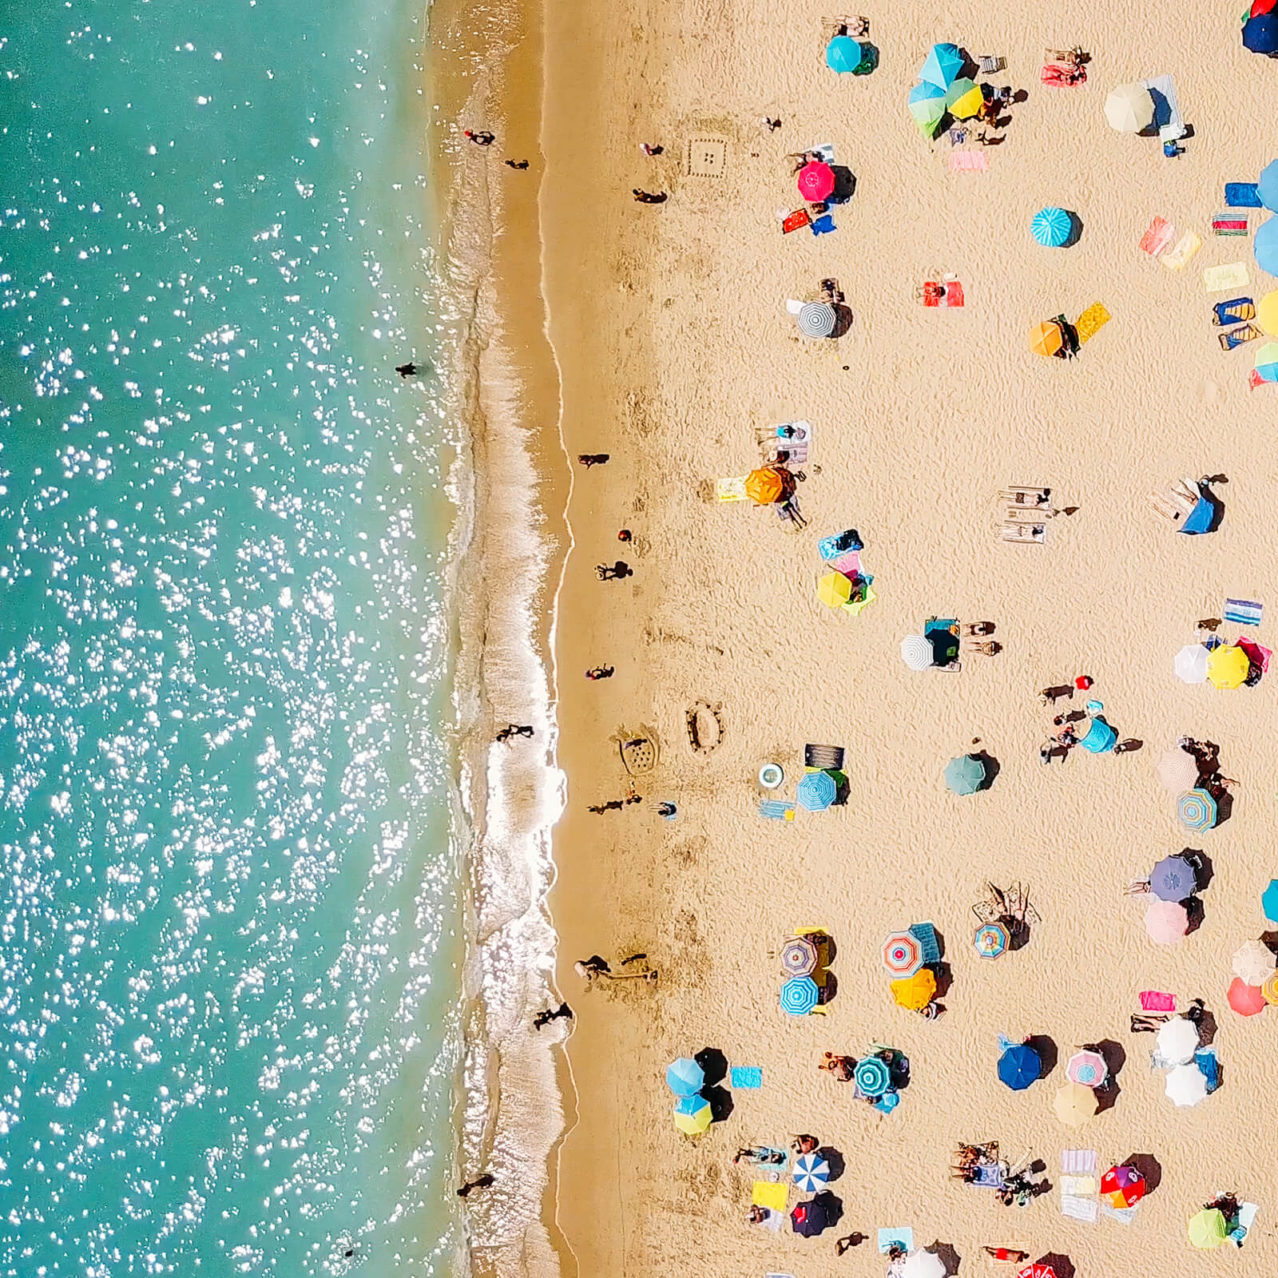 Birds eye view of a busy beach resort, colour umbrellas, golden sand and turquoise water.